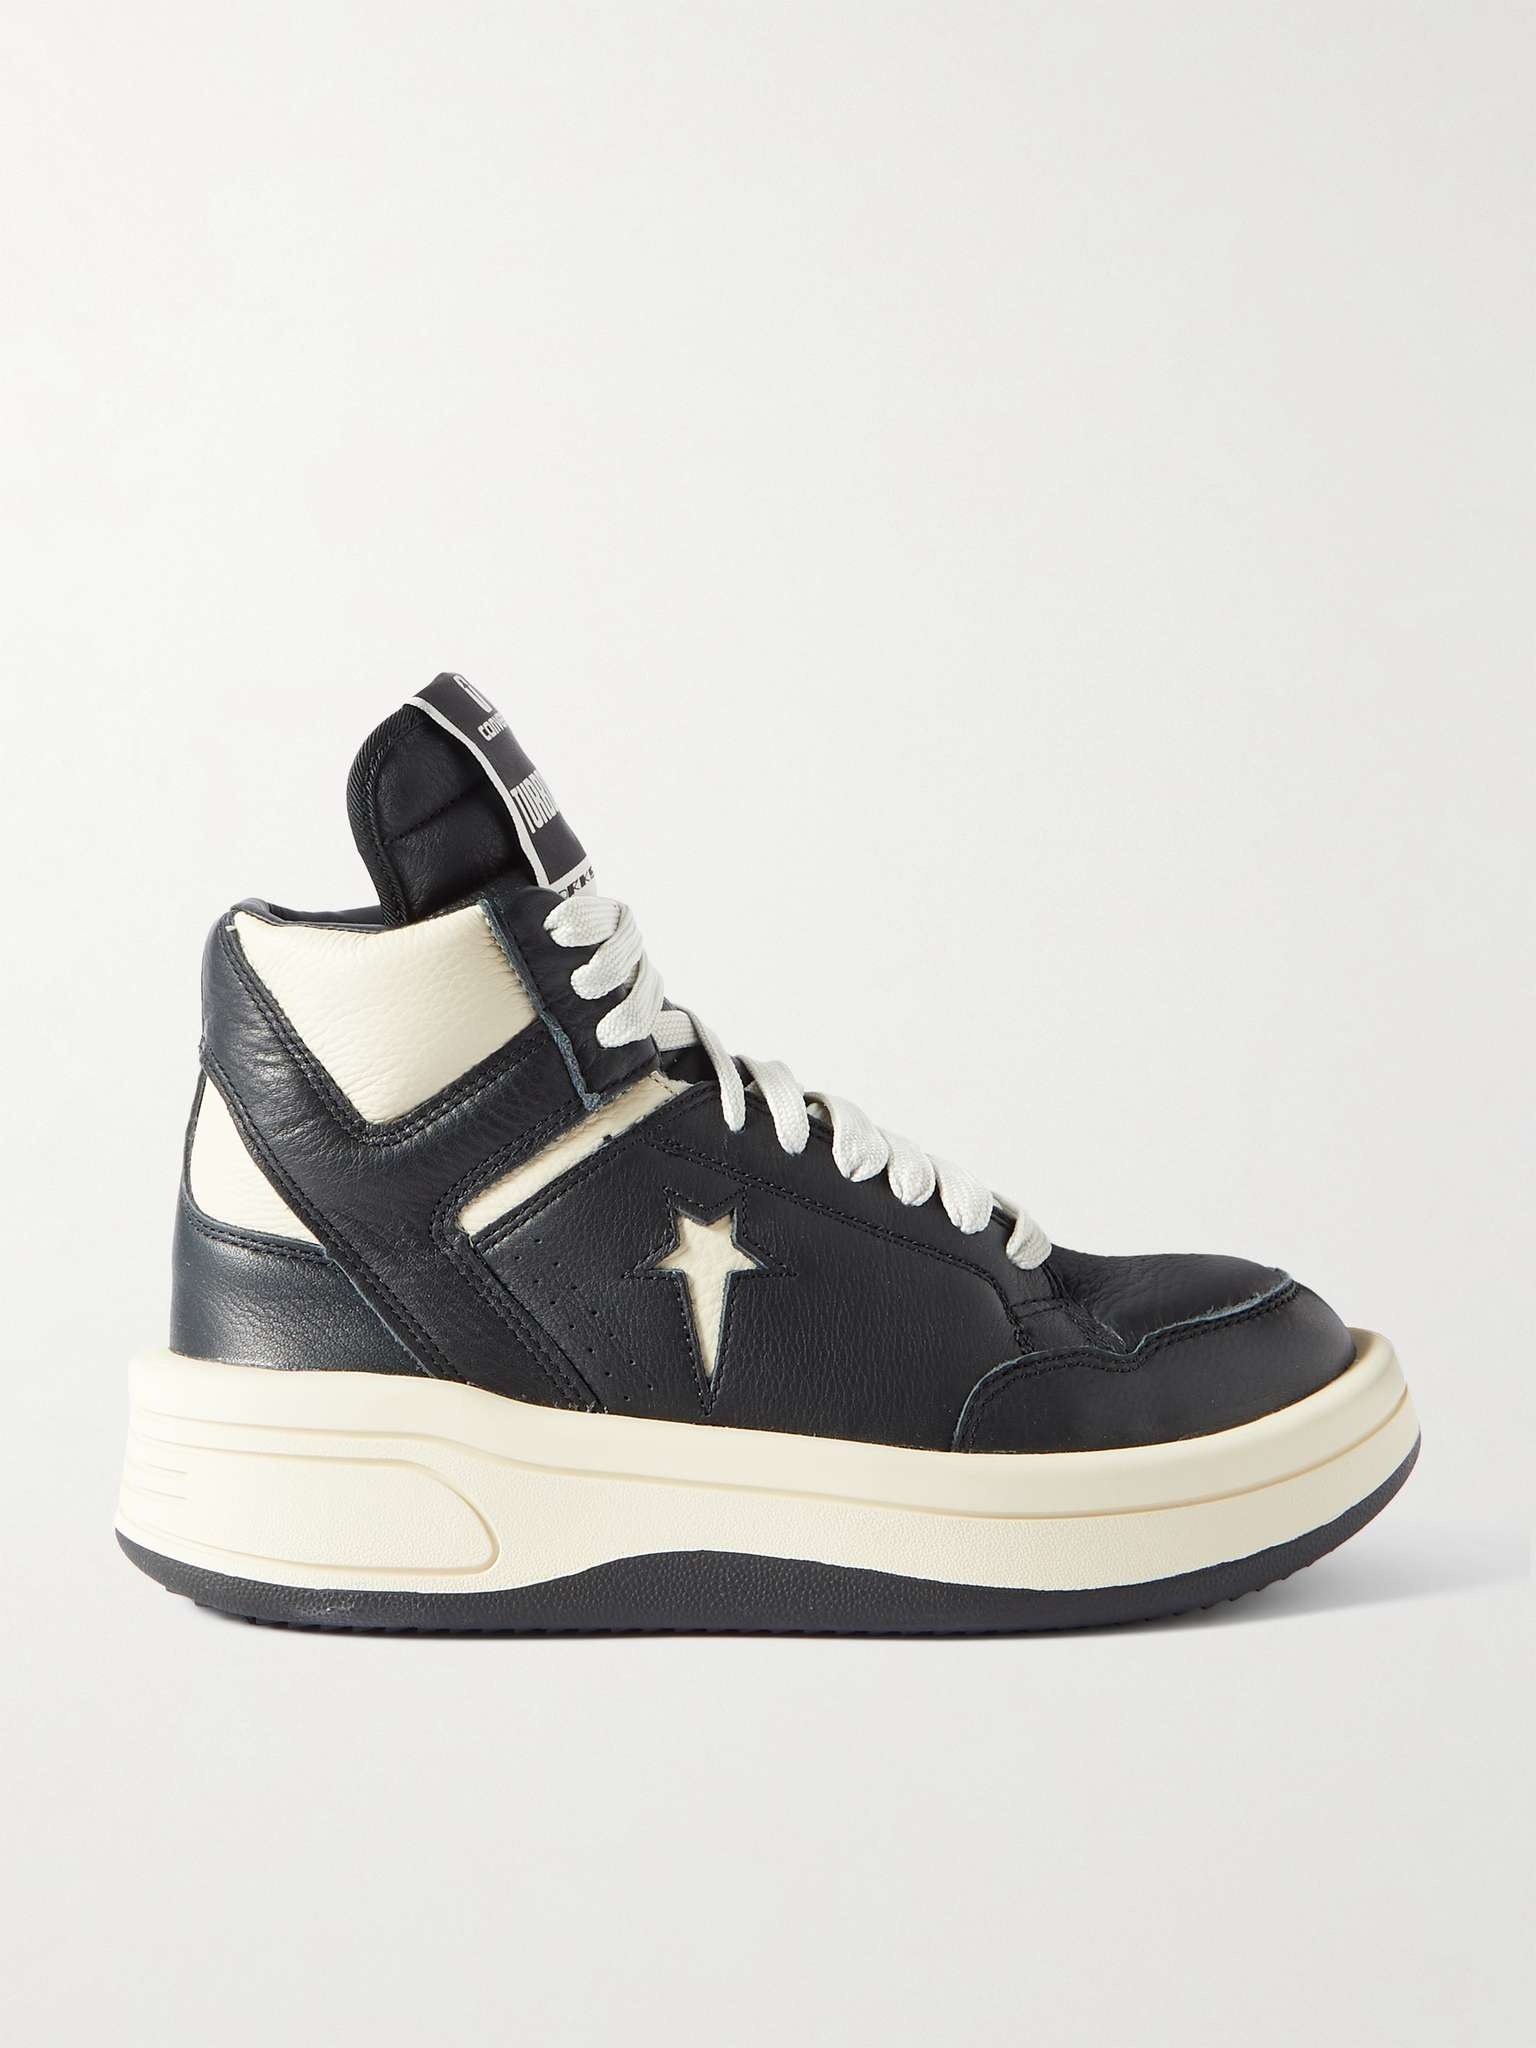 + Converse TURBOWPN Full-Grain Leather High-Top Sneakers - 1